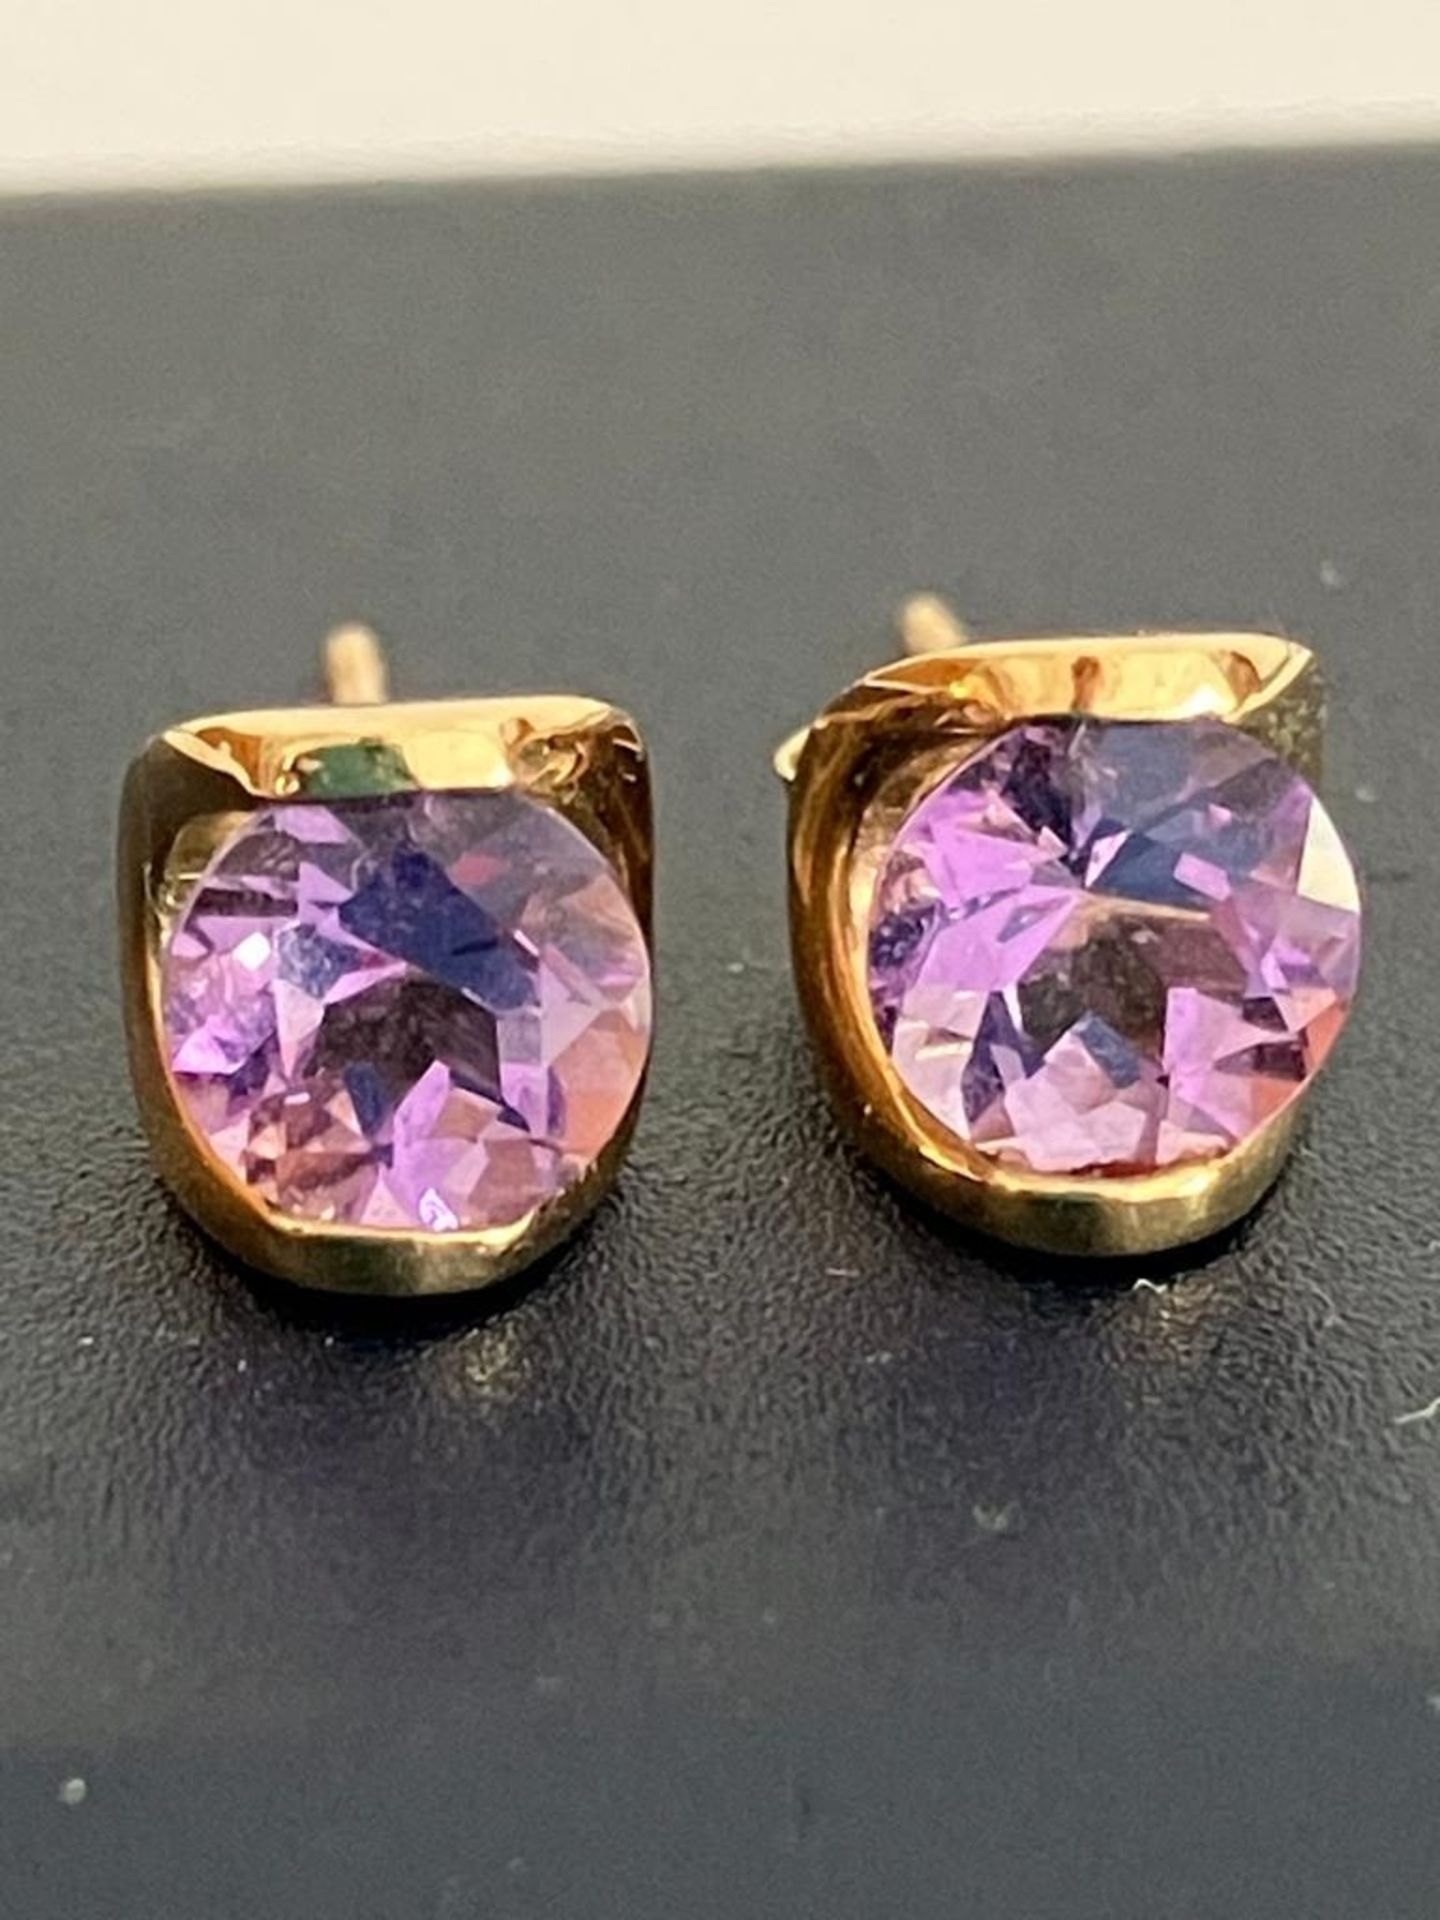 9 carat GOLD EARRINGS set with Round Cut AMETHYST Stones, complete with Gold backs. 0.85 grams.